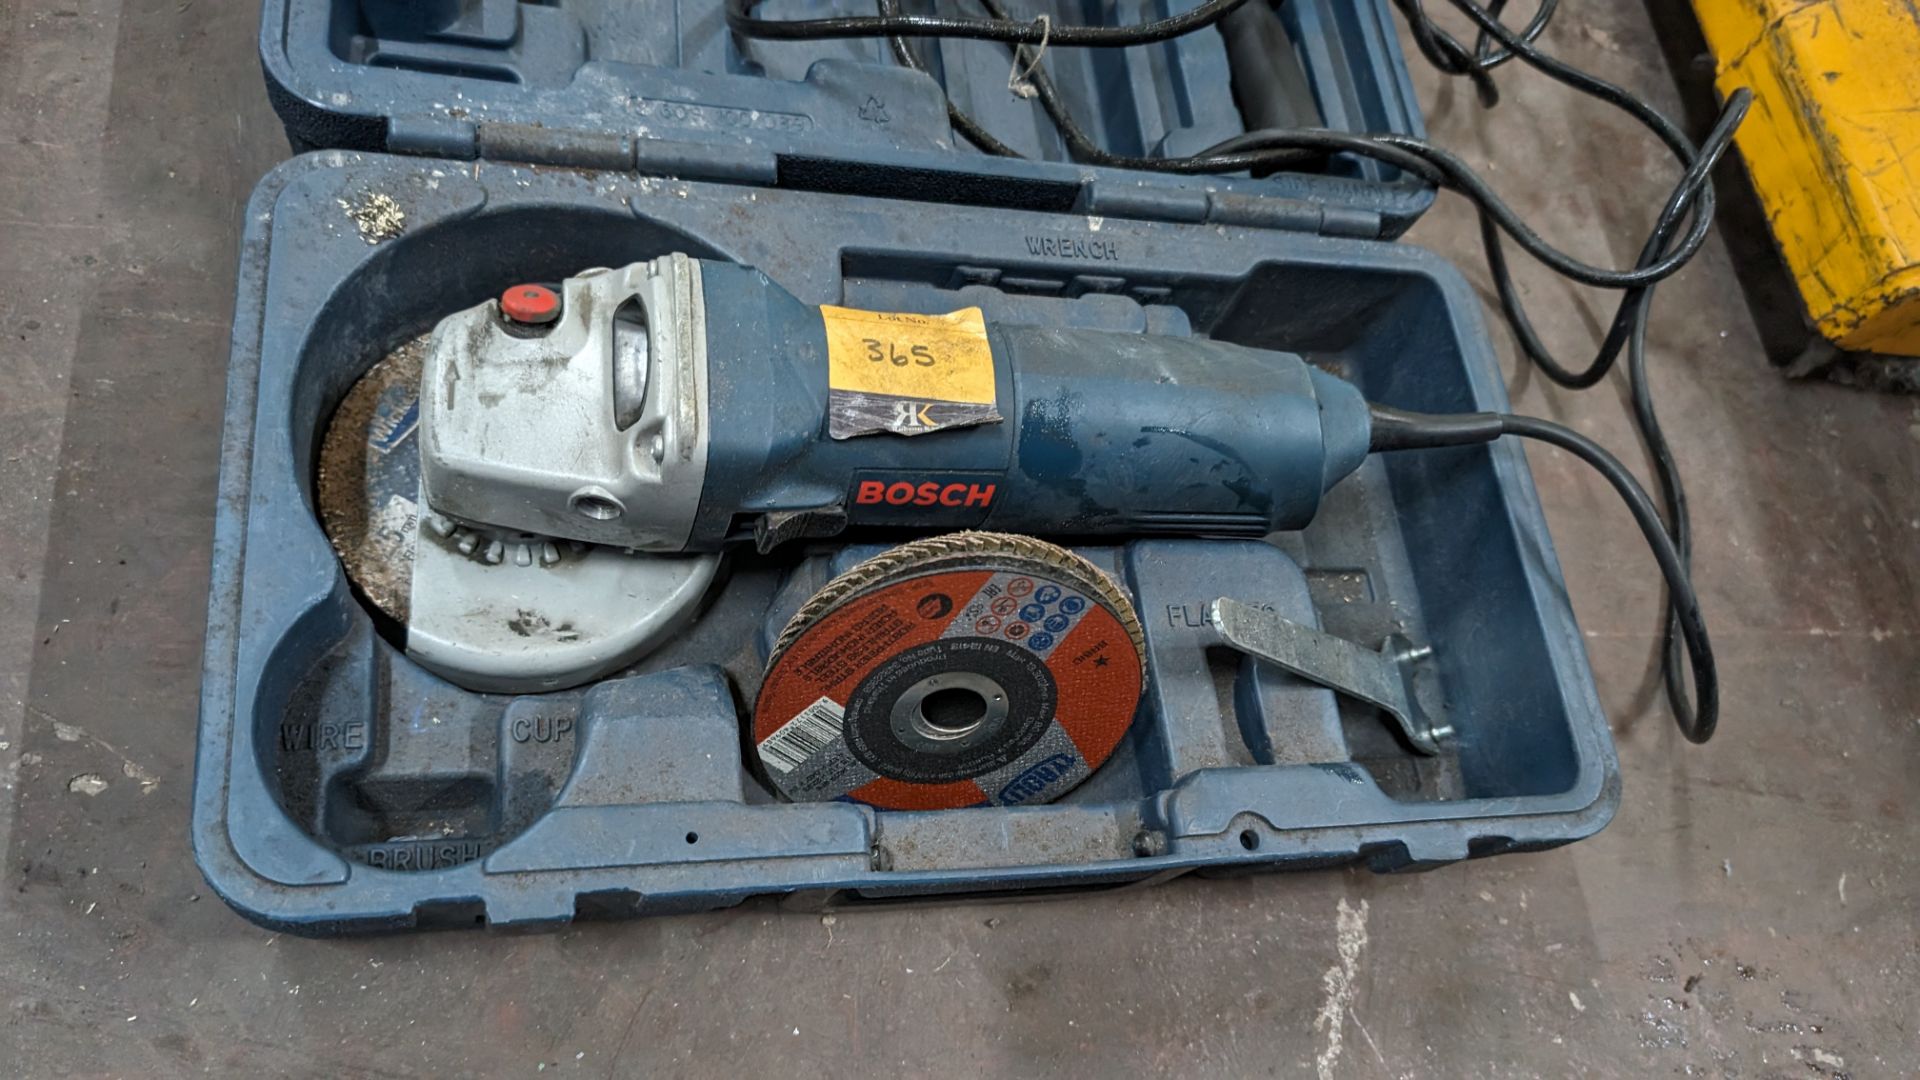 Bosch angle grinder with discs & case - Image 3 of 7